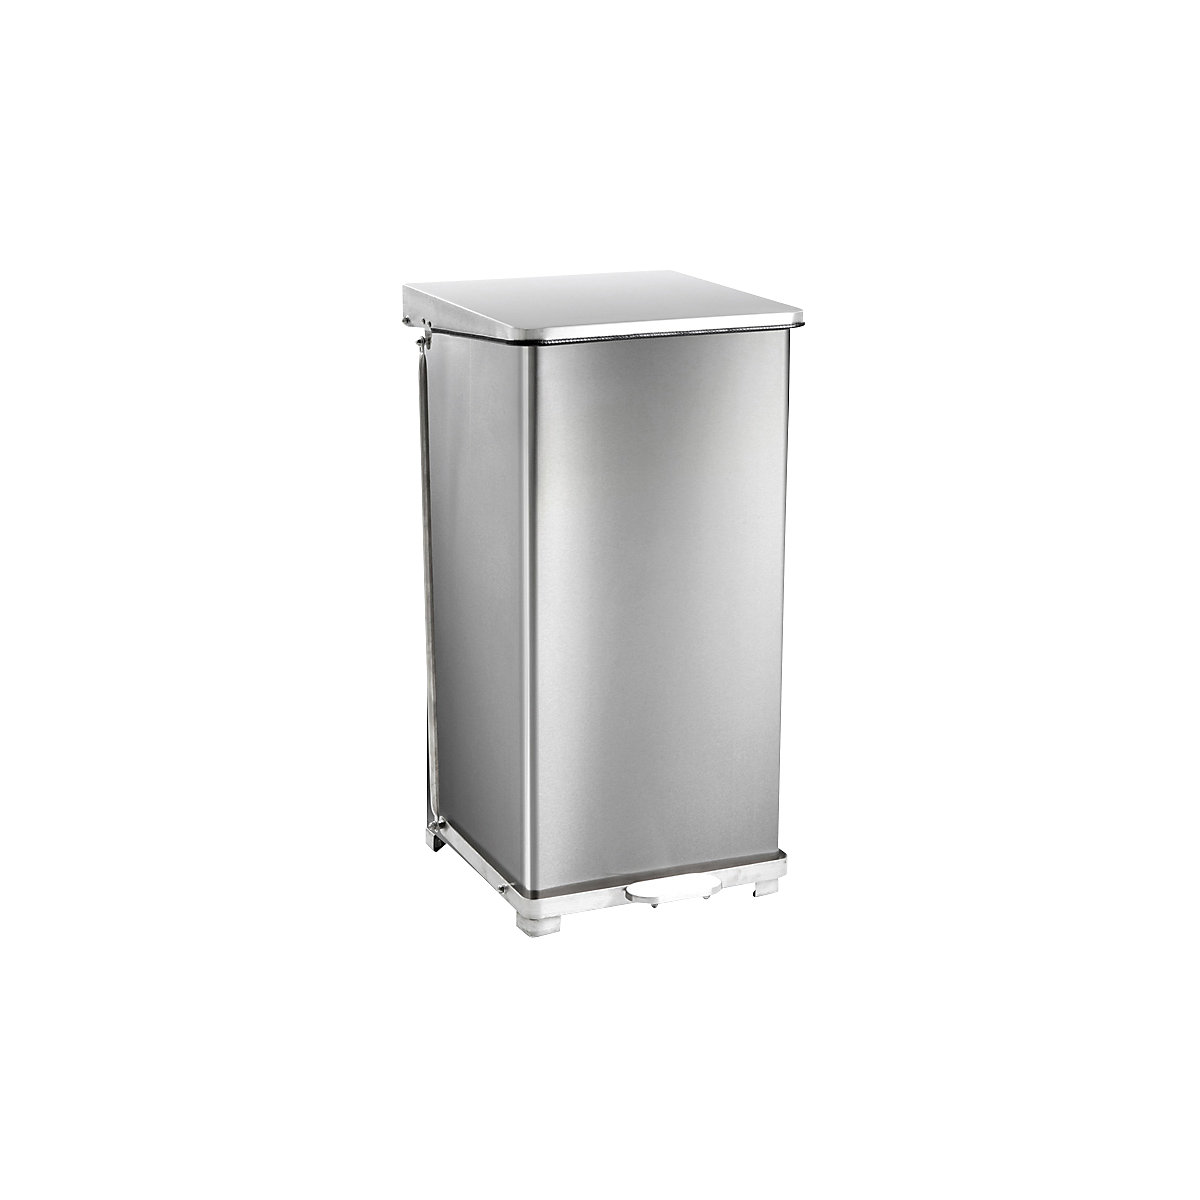 Industrial pedal bin, stainless steel, capacity 90 l, HxWxD 770 x 445 x 435 mm